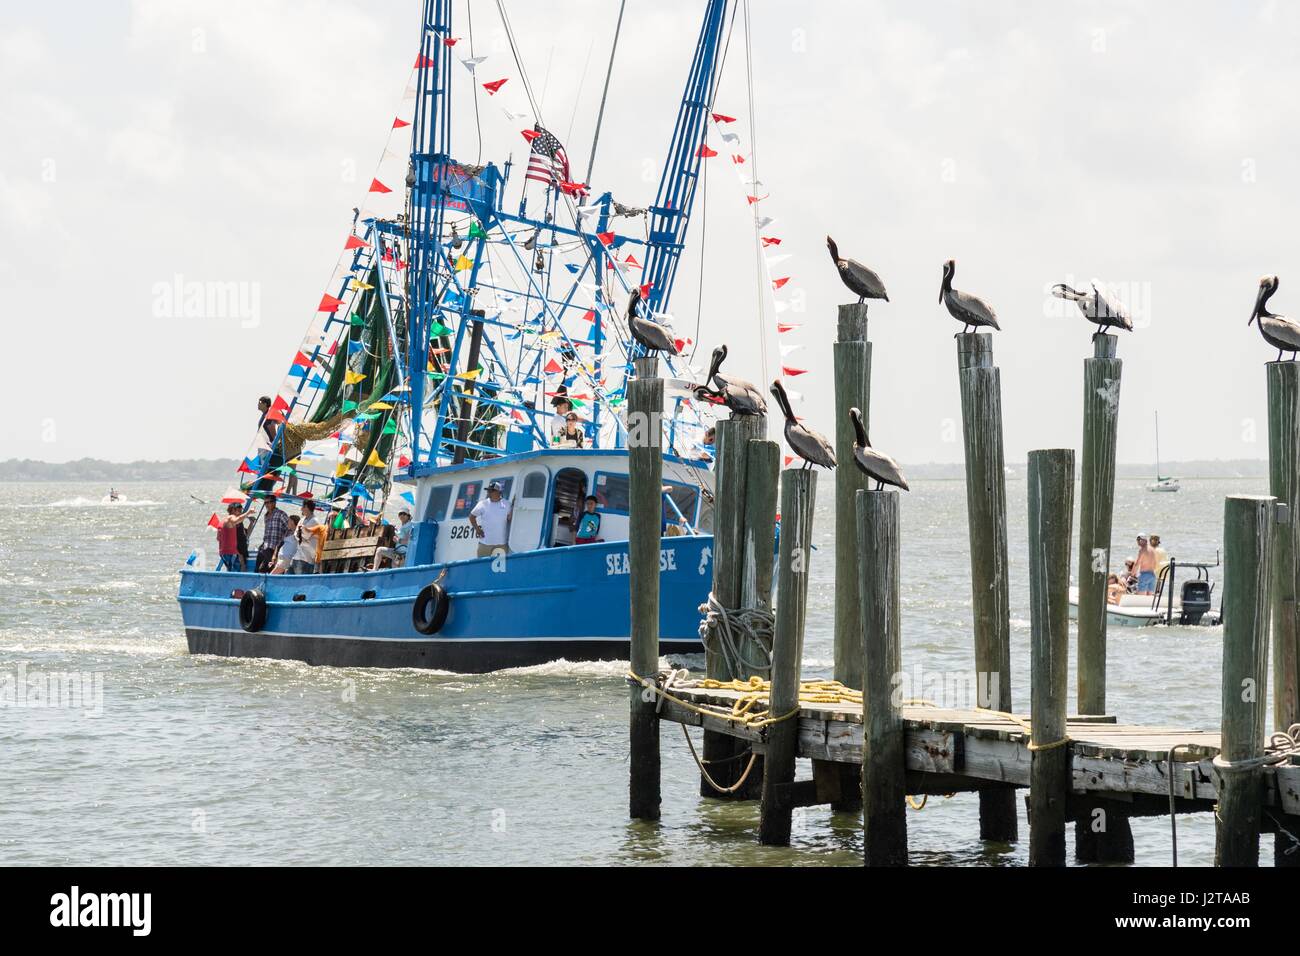 Charleston, USA. 30th Apr, 2017. A decorated shrimp boat parades past the commercial fishing docks down Shem Creek during the annual Blessing of the Fleet signifying the start of the commercial shrimping season April 30, 2017 in Mount Pleasant, South Carolina. Coastal shrimping is part of the low country heritage but has been declining rapidly with rising costs and increased foreign competition. Credit: Planetpix/Alamy Live News Stock Photo